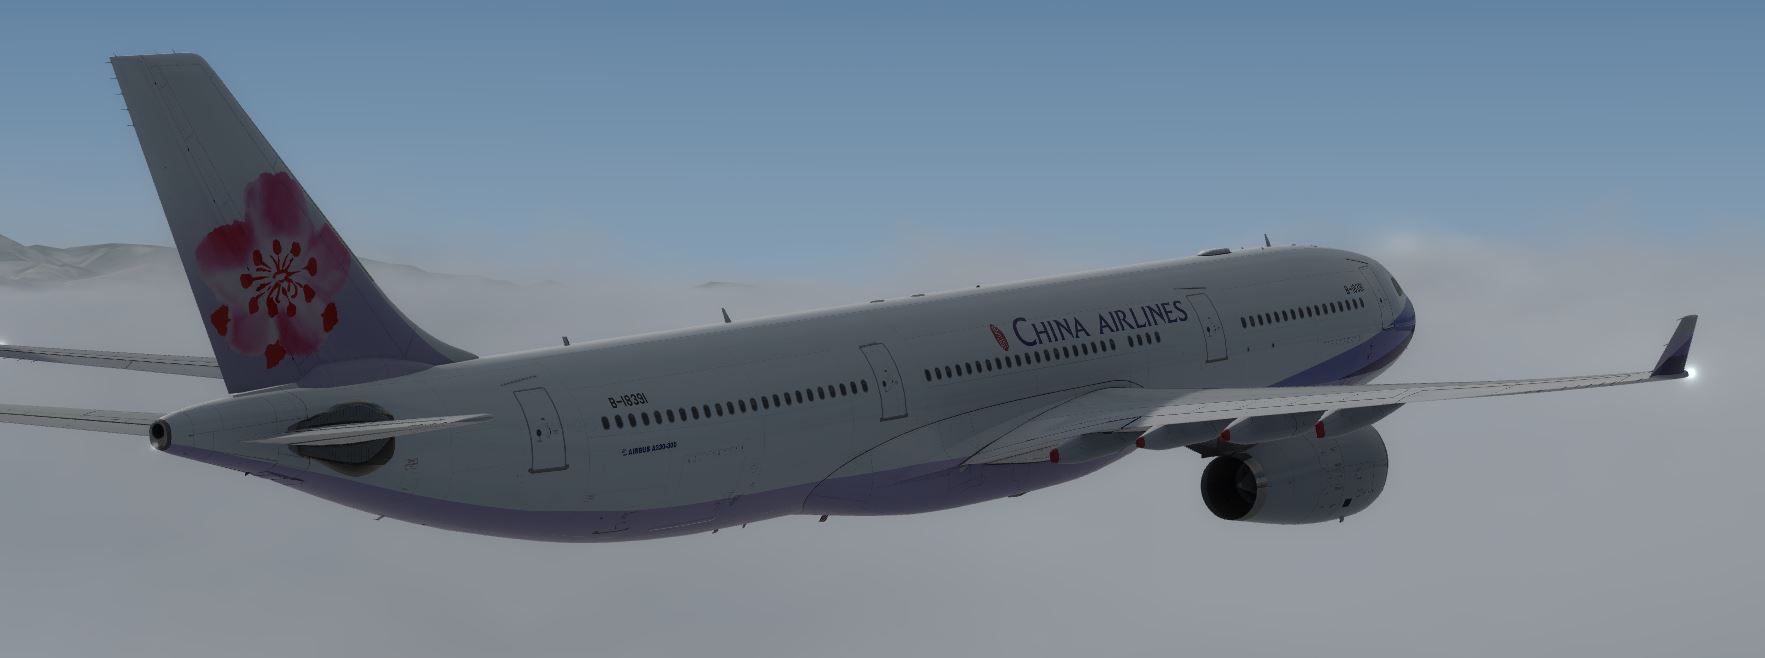 AS A330 ChinaAirline-9805 